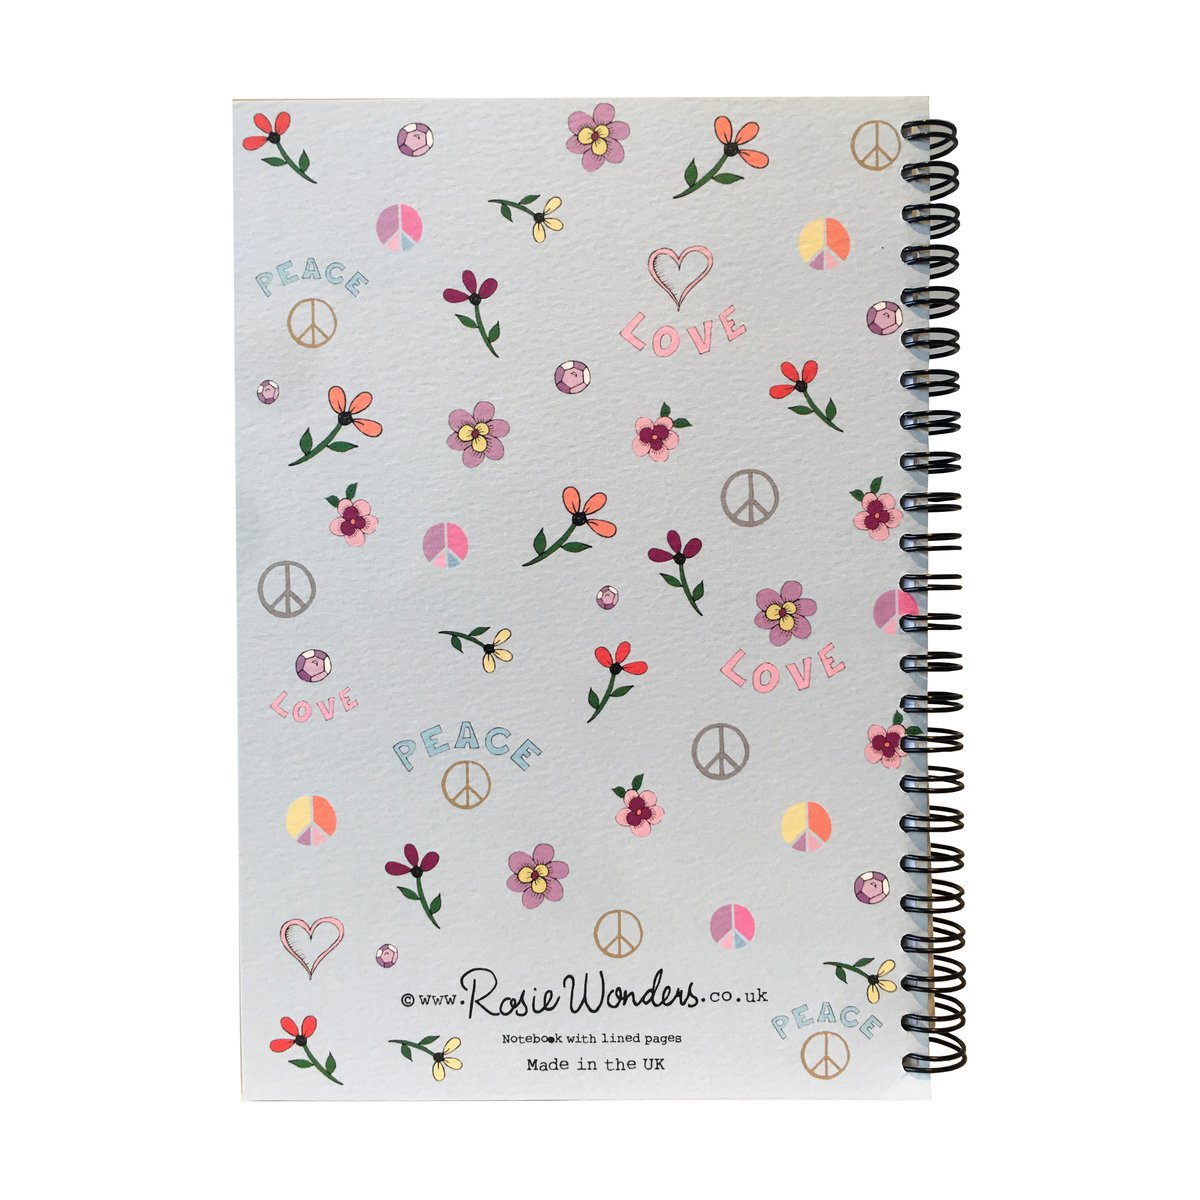 Peace Doves Spiral Bound Notebook